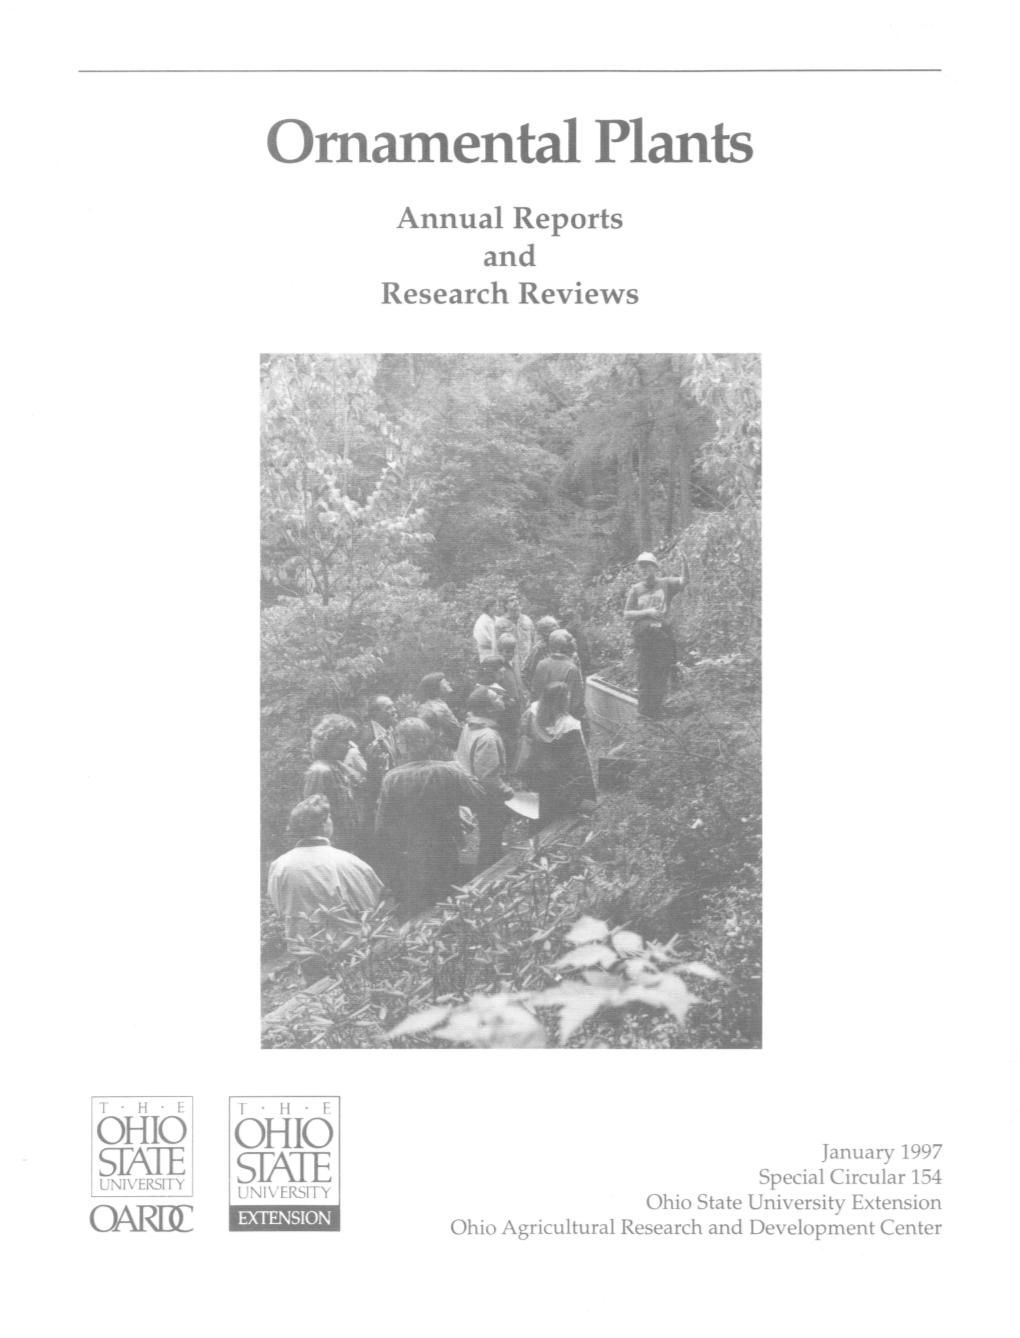 Ornamental Plants Annual Reports and Research Reviews